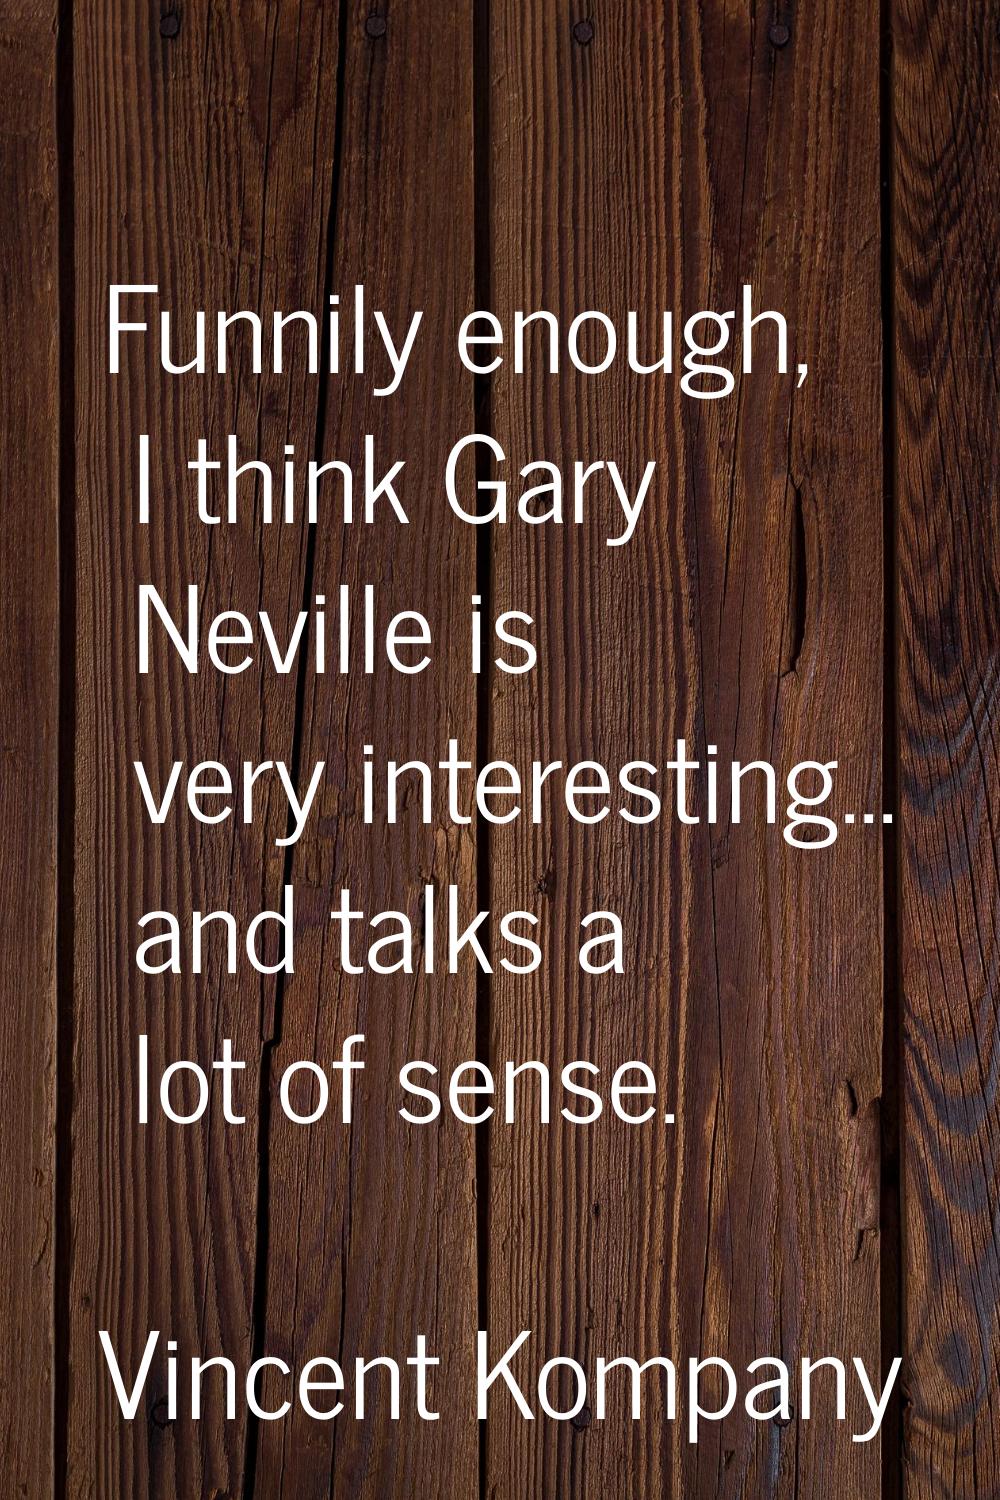 Funnily enough, I think Gary Neville is very interesting... and talks a lot of sense.